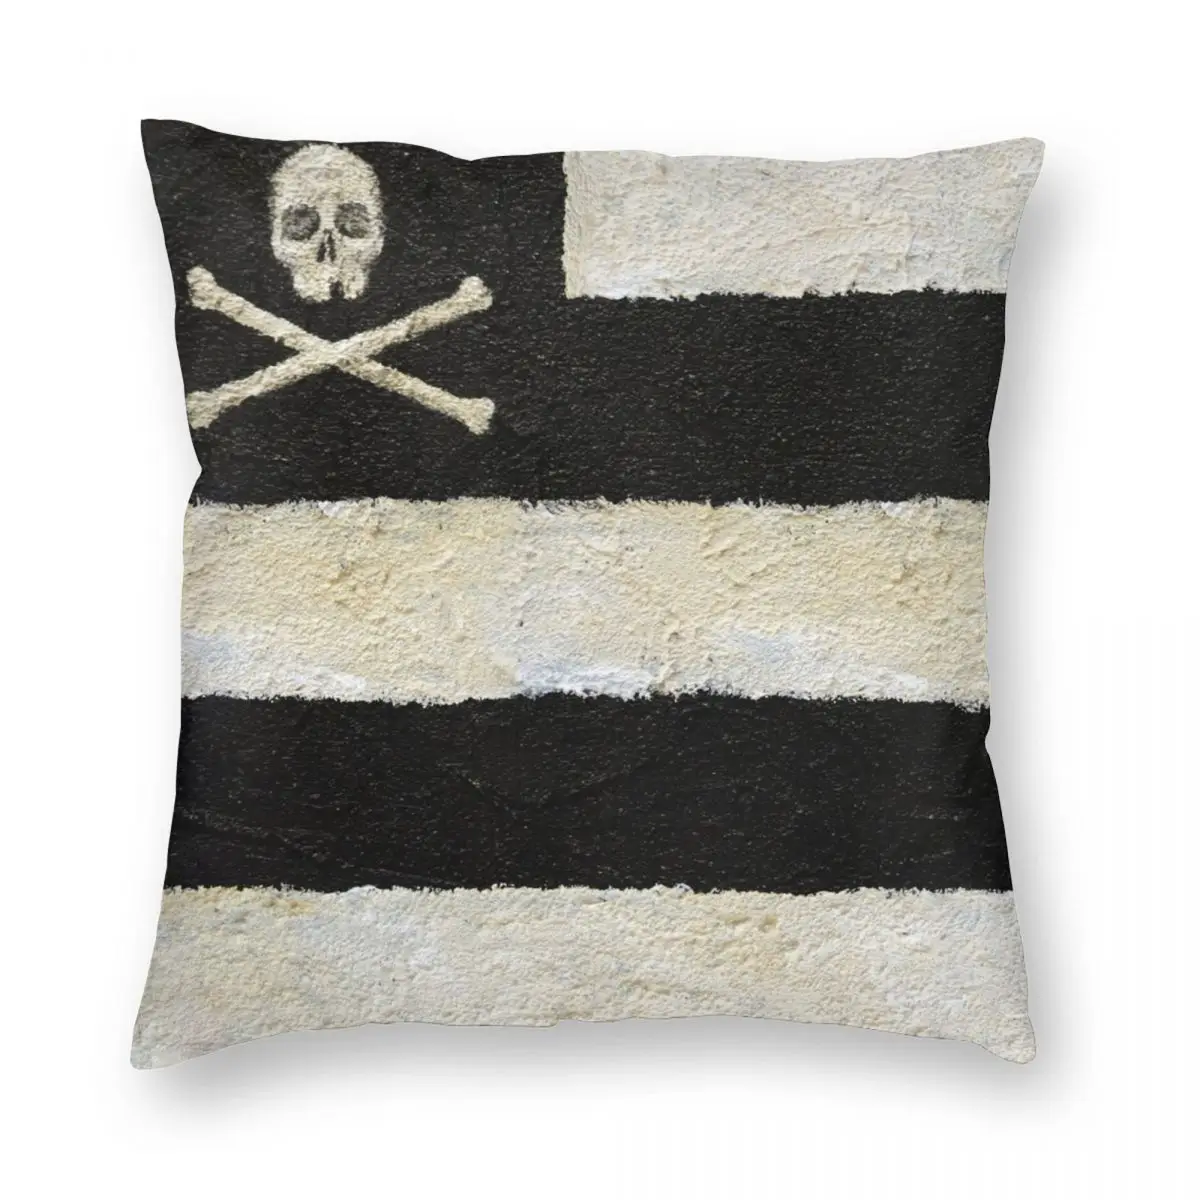 

Skulls Pirate Gothic Art Pillowcase Printing Fabric Cushion Cover Decorative Pillow Case Cover Home Zippered 45X45cm